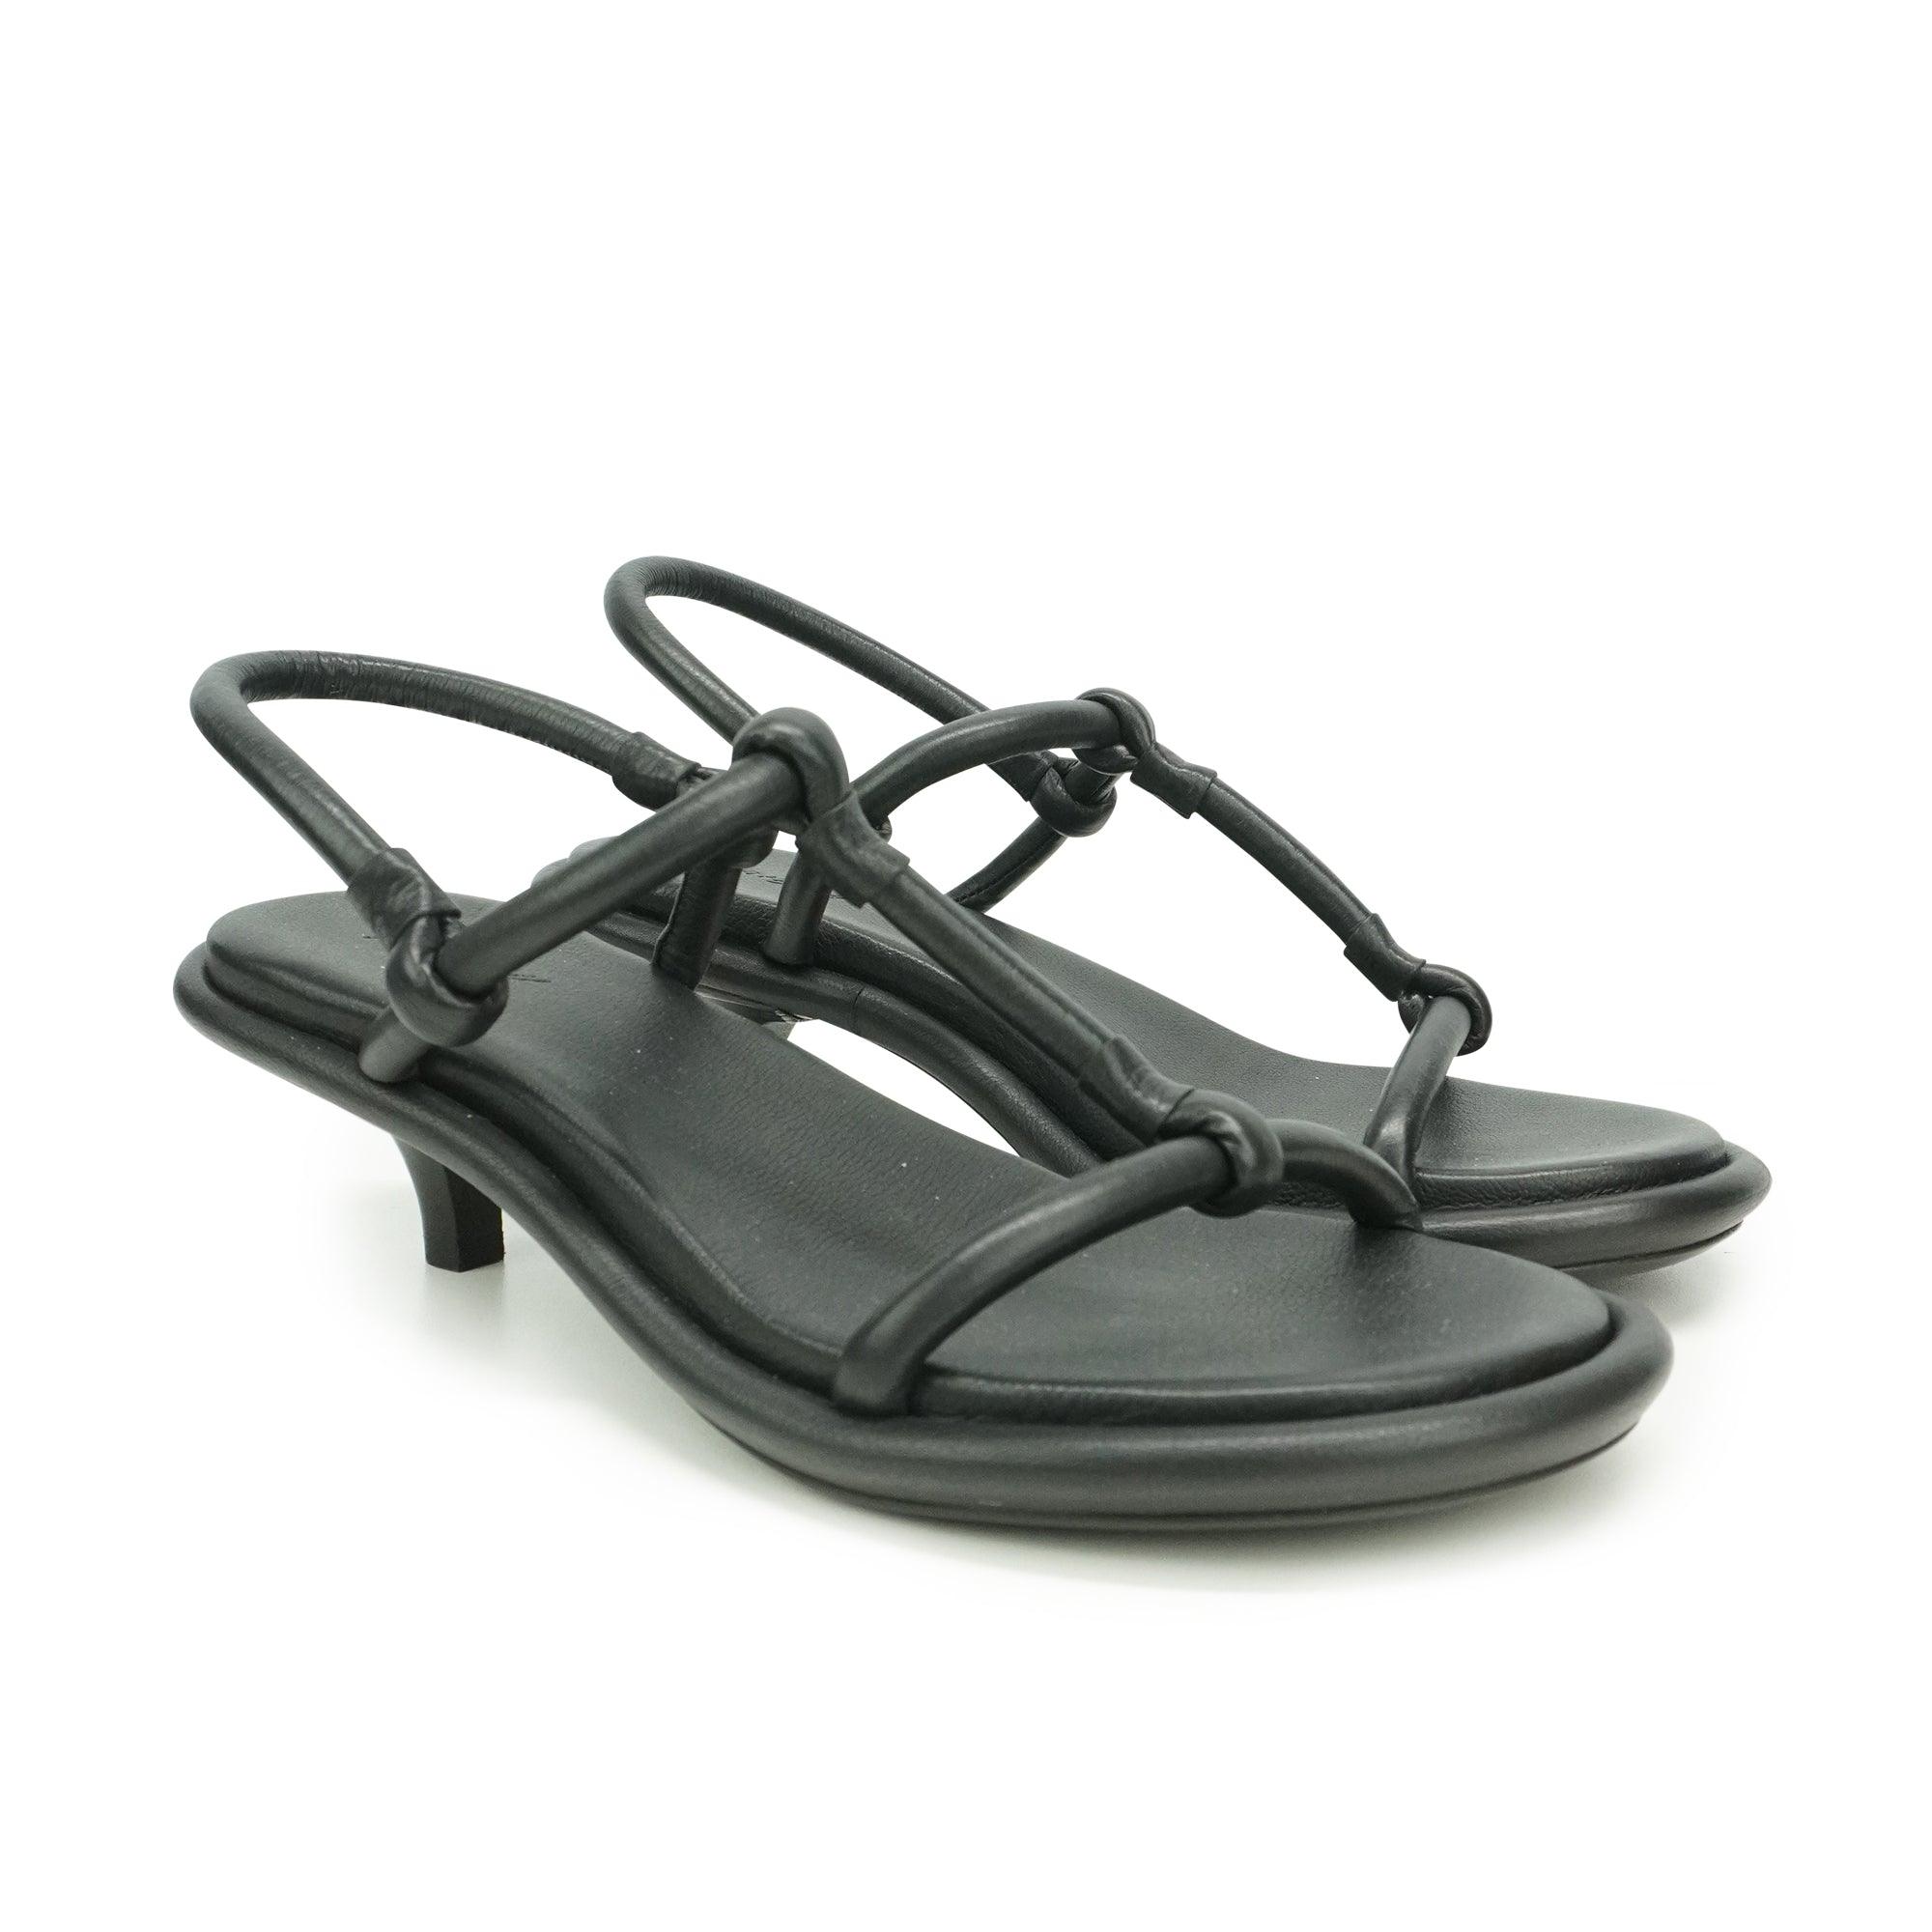 Marsell Sandals - Women's 38 - Fashionably Yours